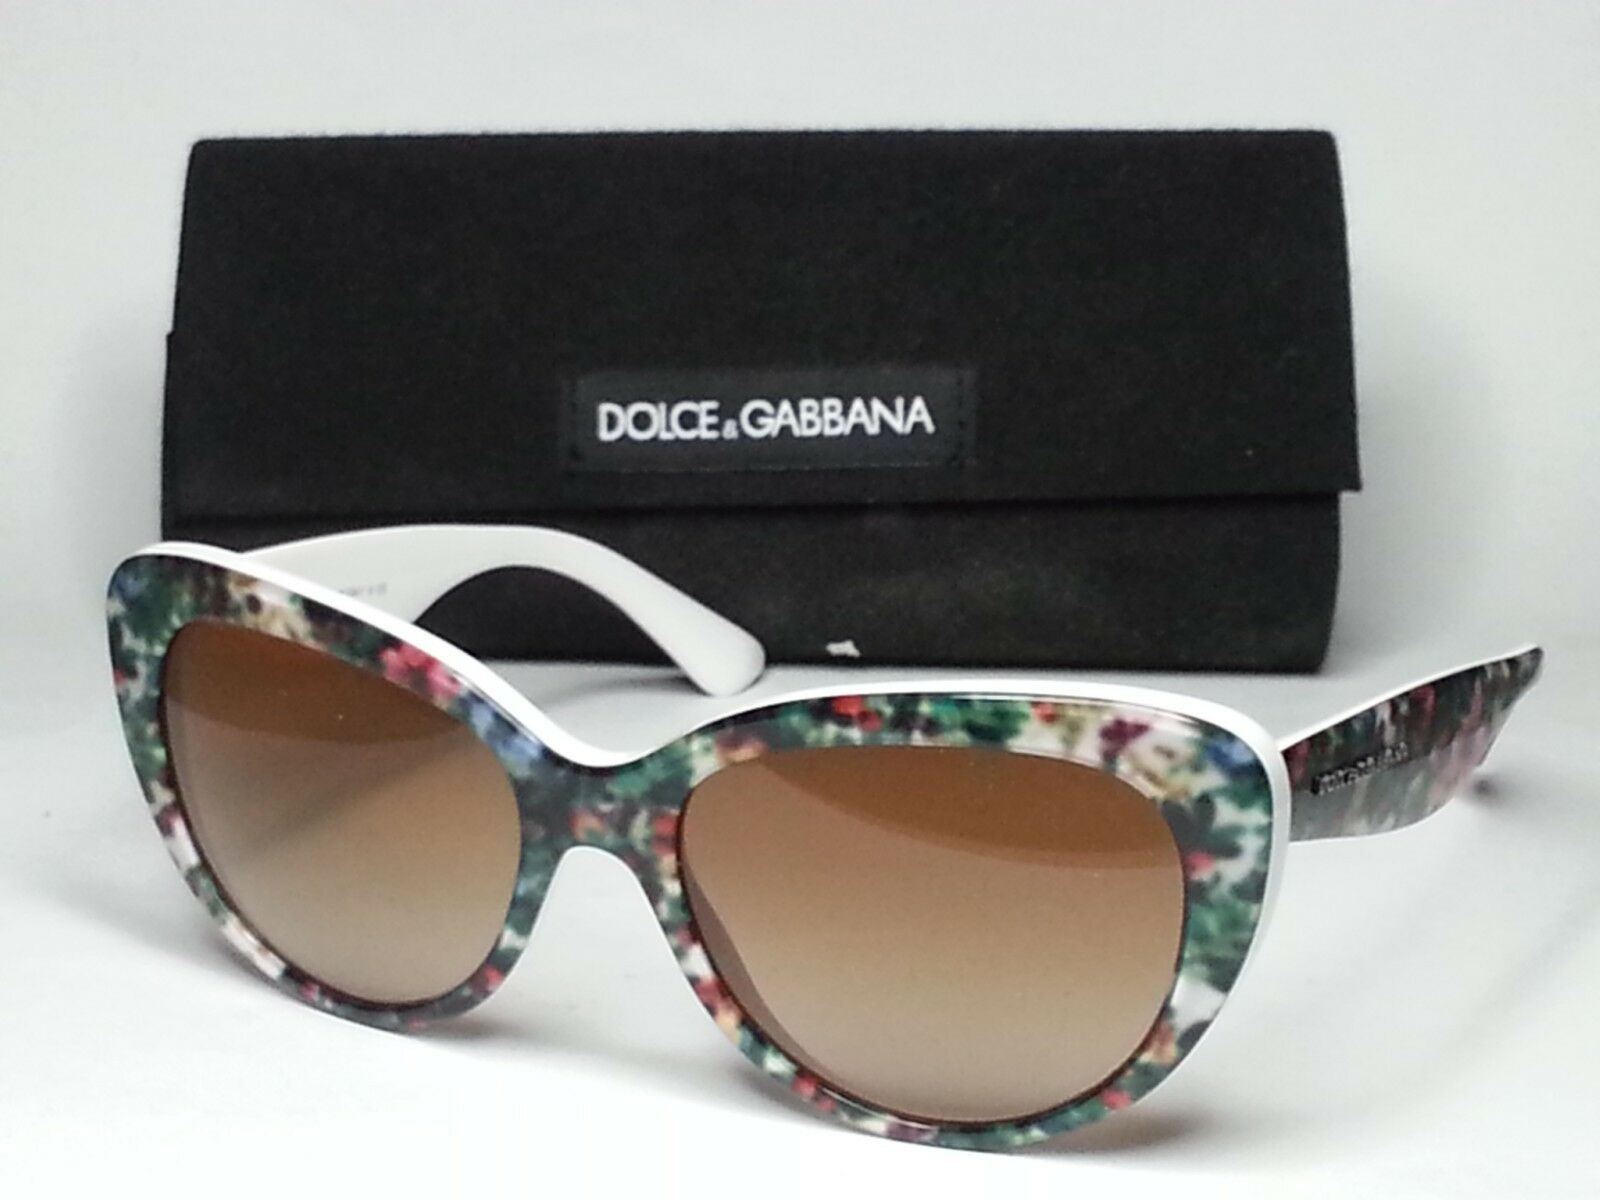 Dolce&Gabbana DG4189 Women Sunglasses Floral White Cat Eye New with Case ITALY - £135.03 GBP